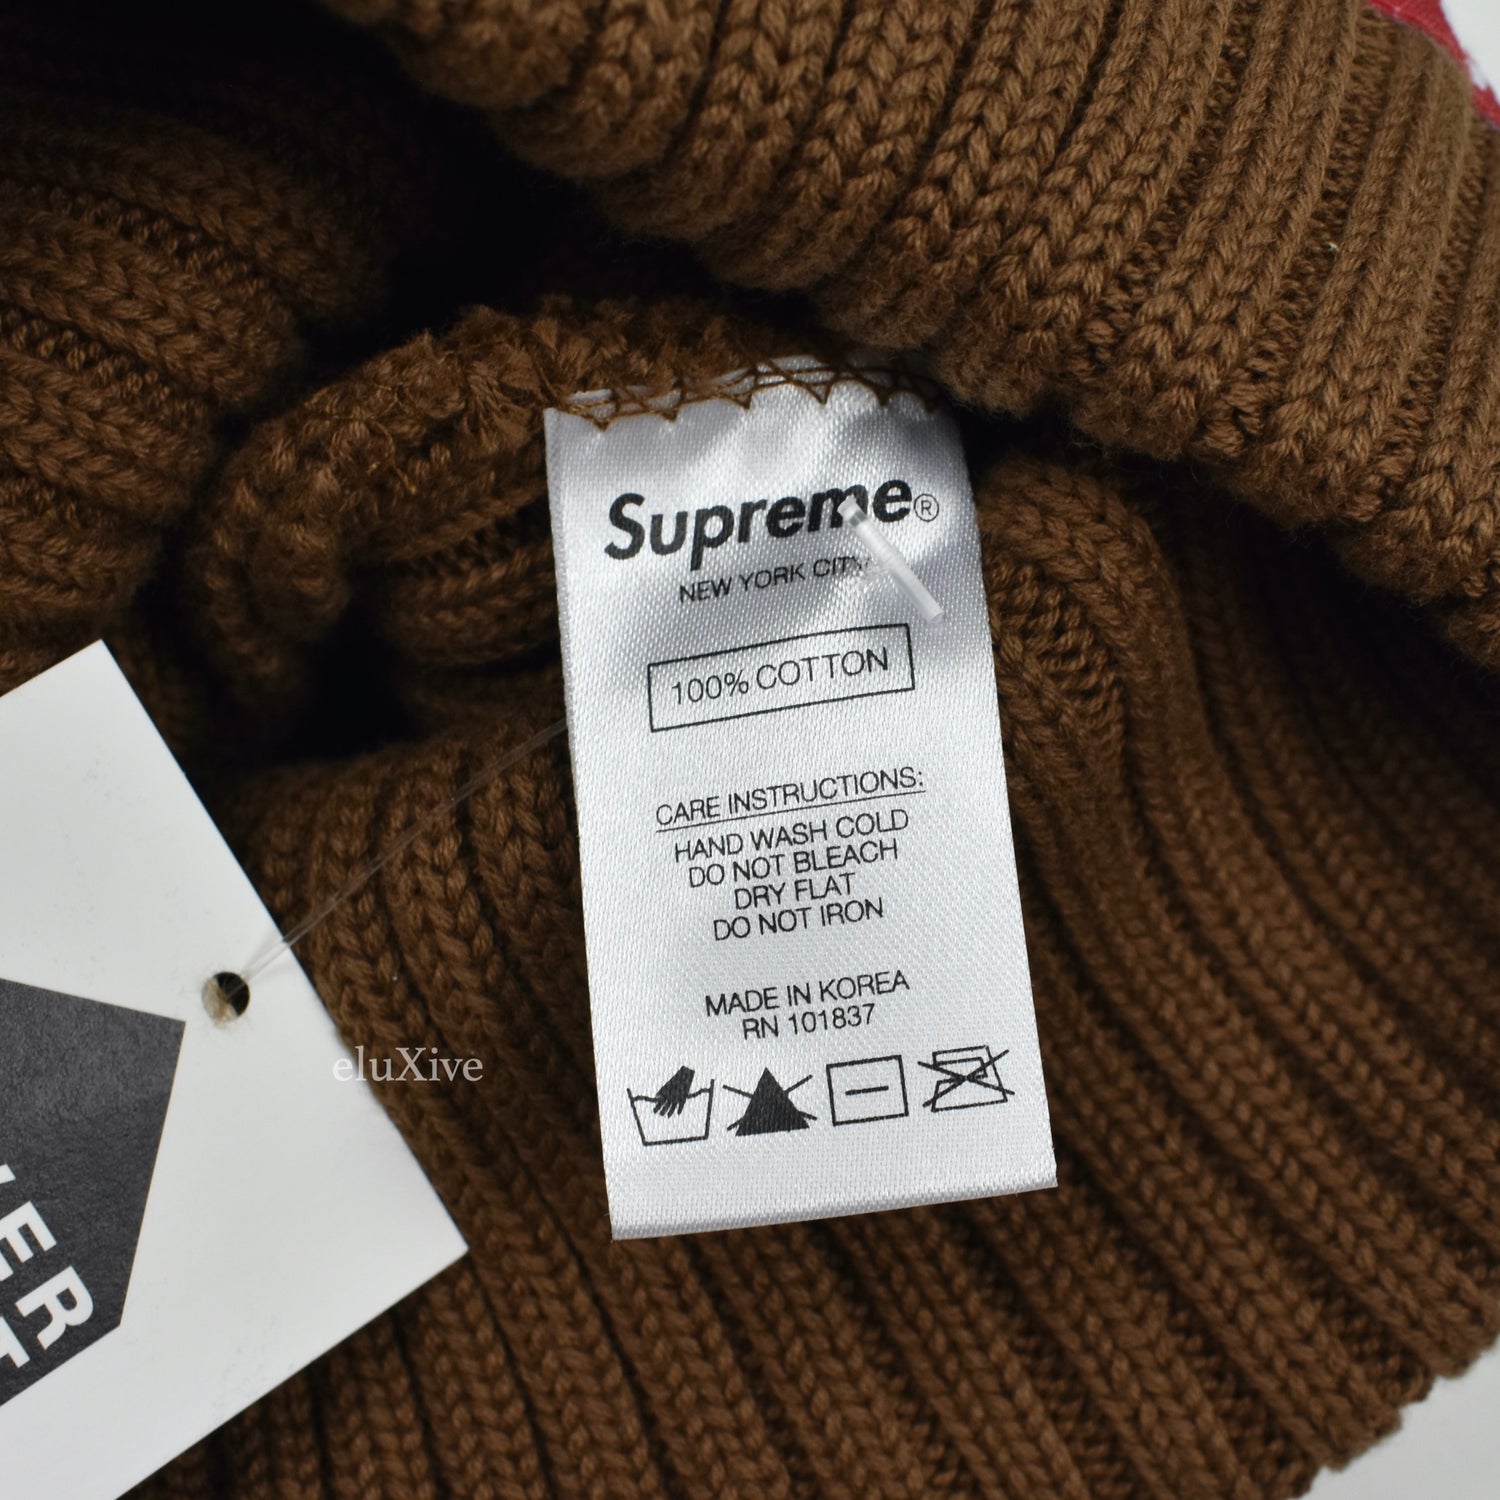 Everyday Box Logo Beanie (olive) by The Official Brand